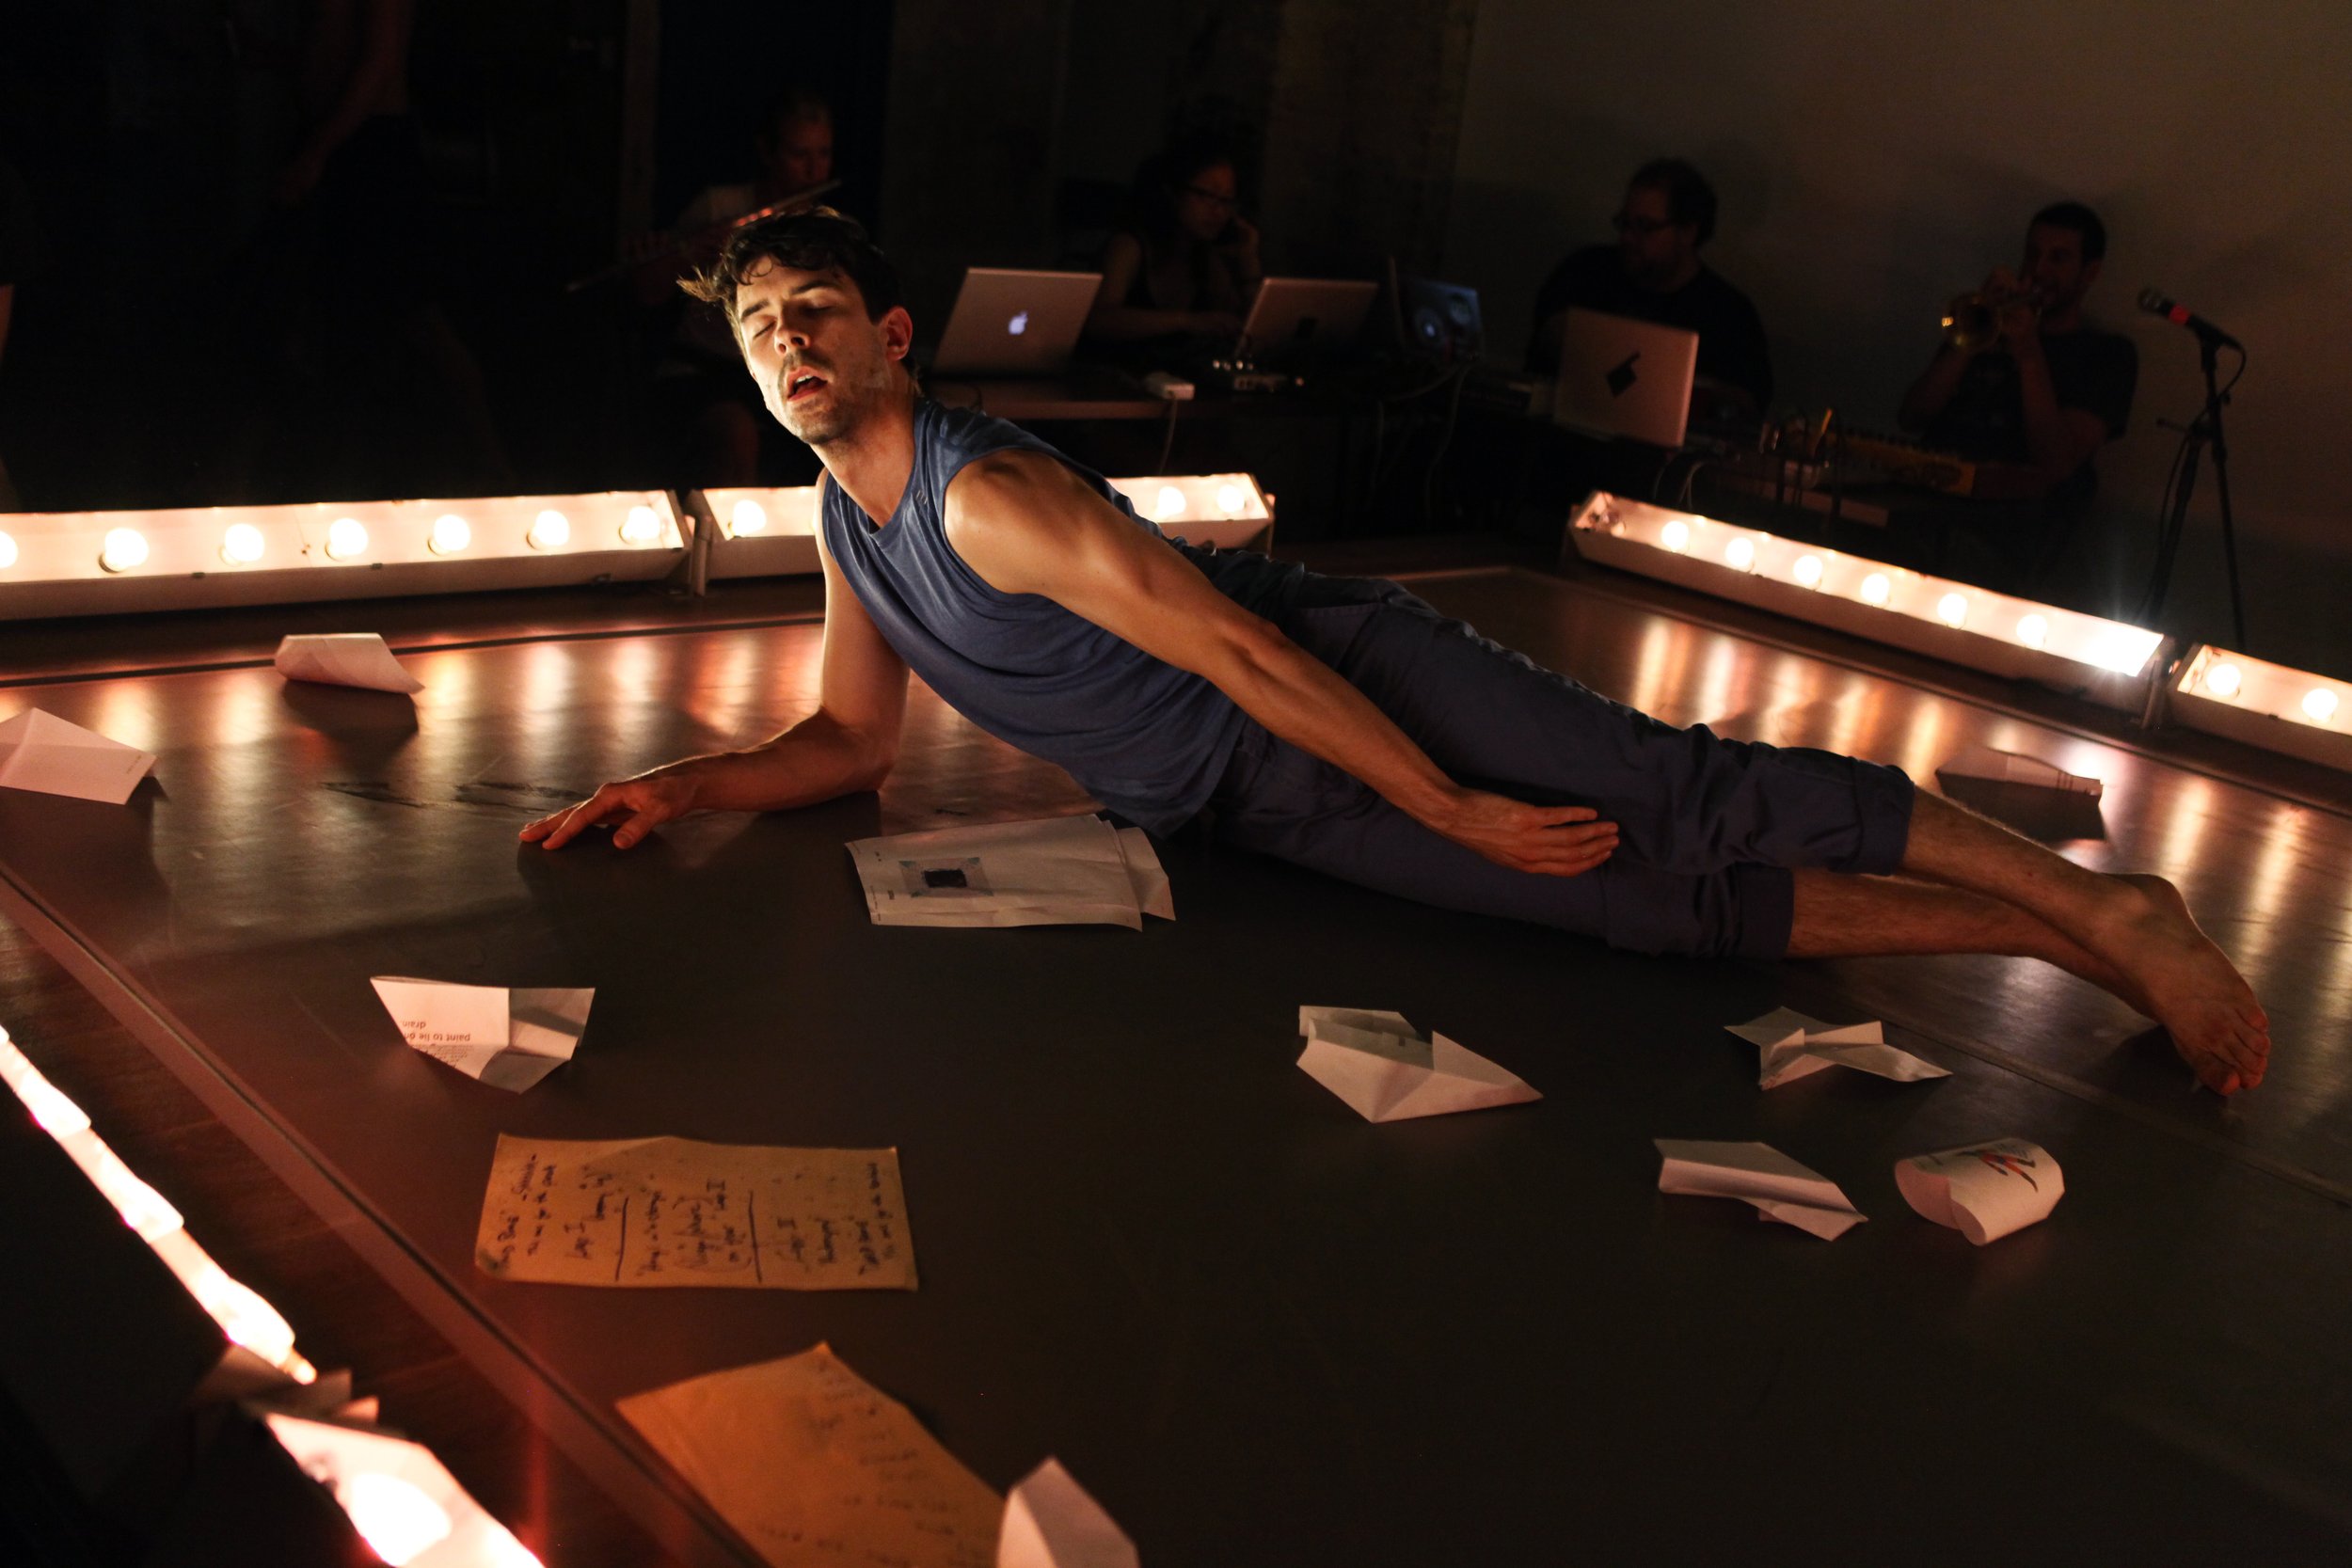 A performer extends his body laying on his side among many crumpled pages on a stage bordered by single rows of light boxes. Photo by Julieta Cervantes